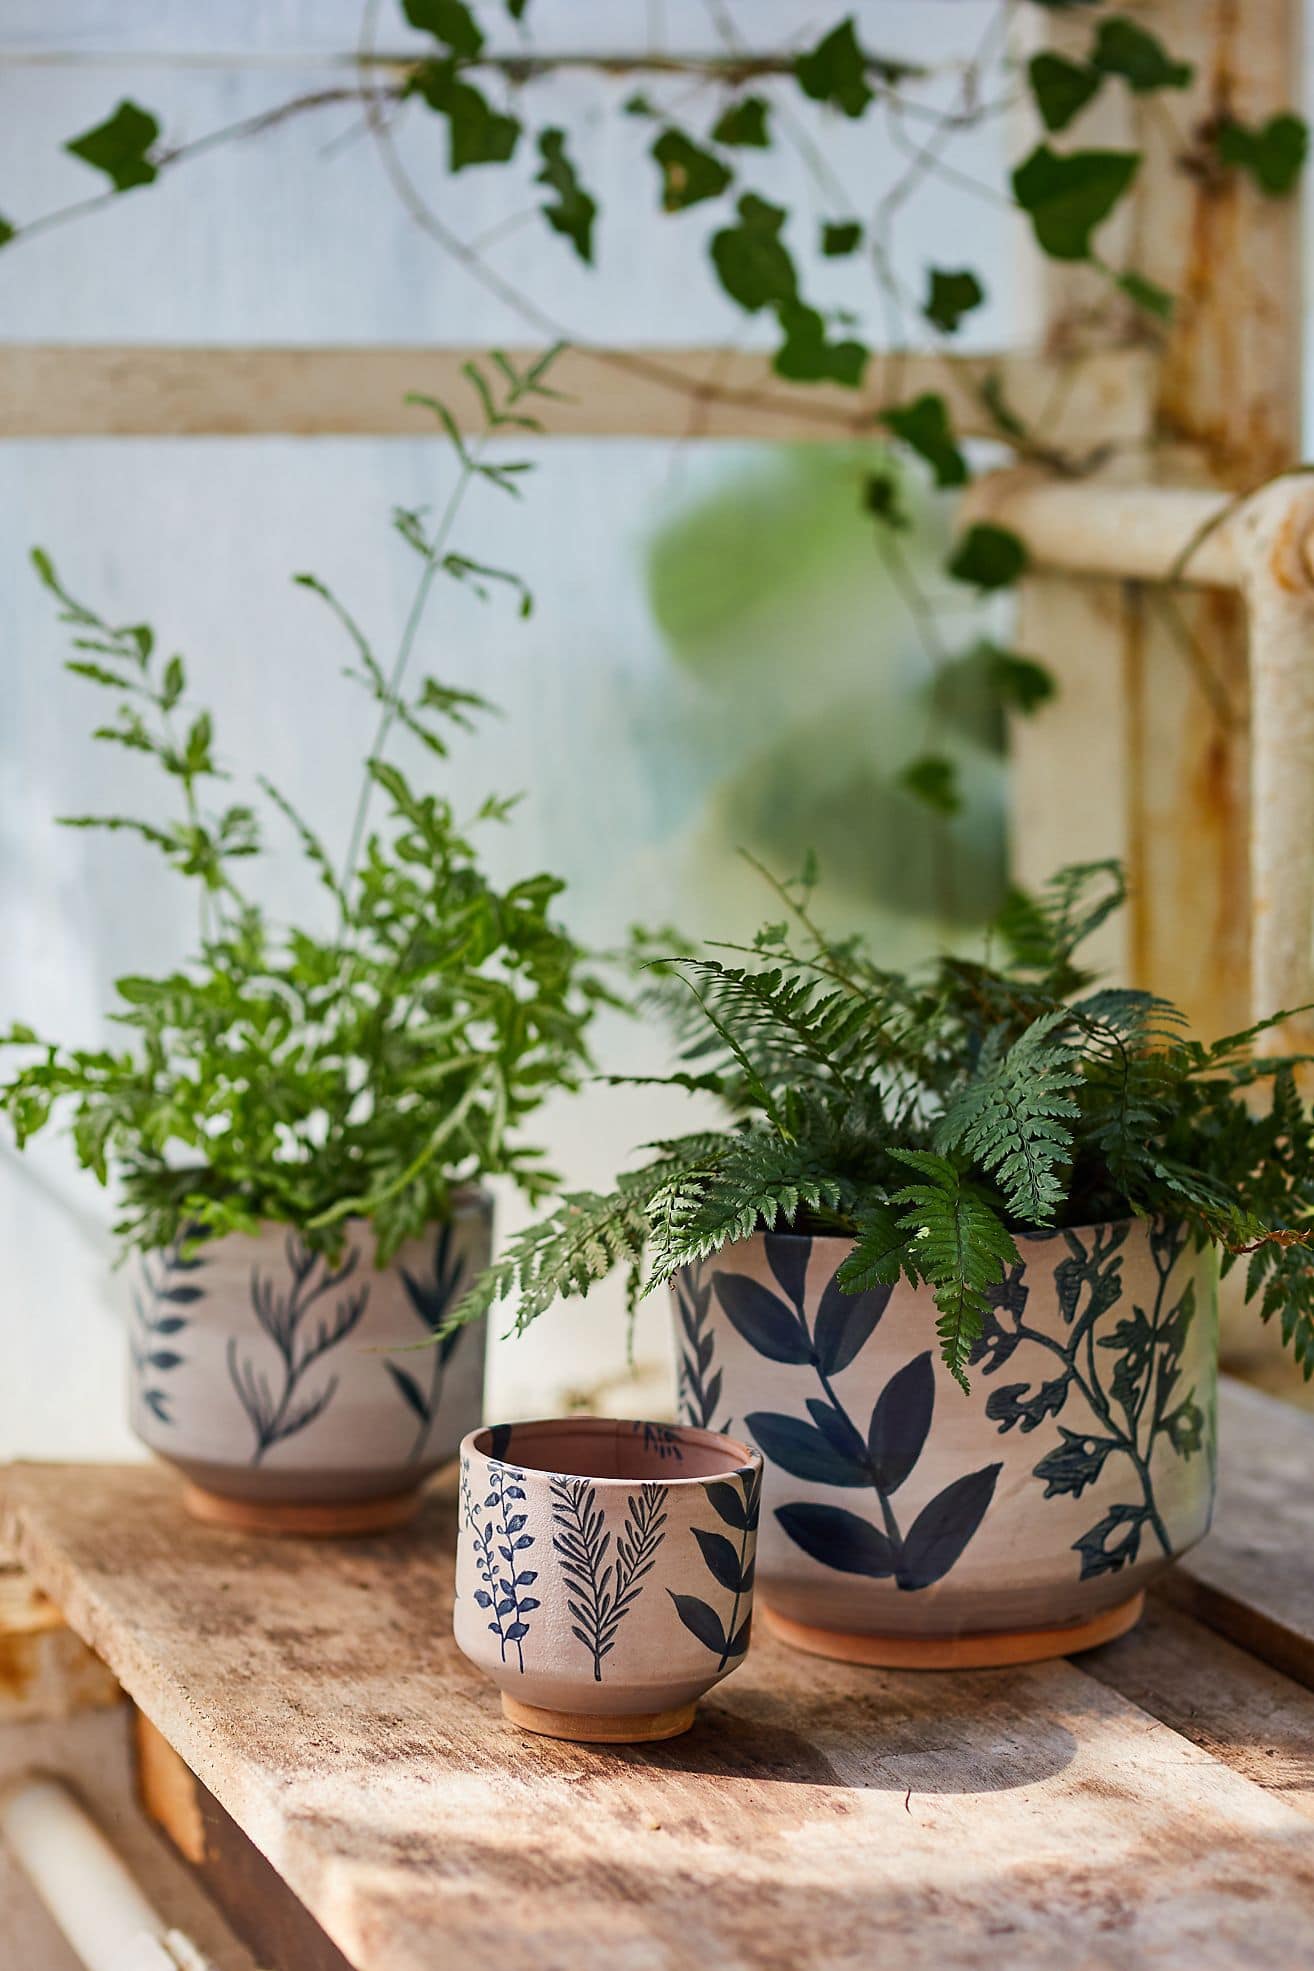 Load Up Your Shelves with Pretty Planters